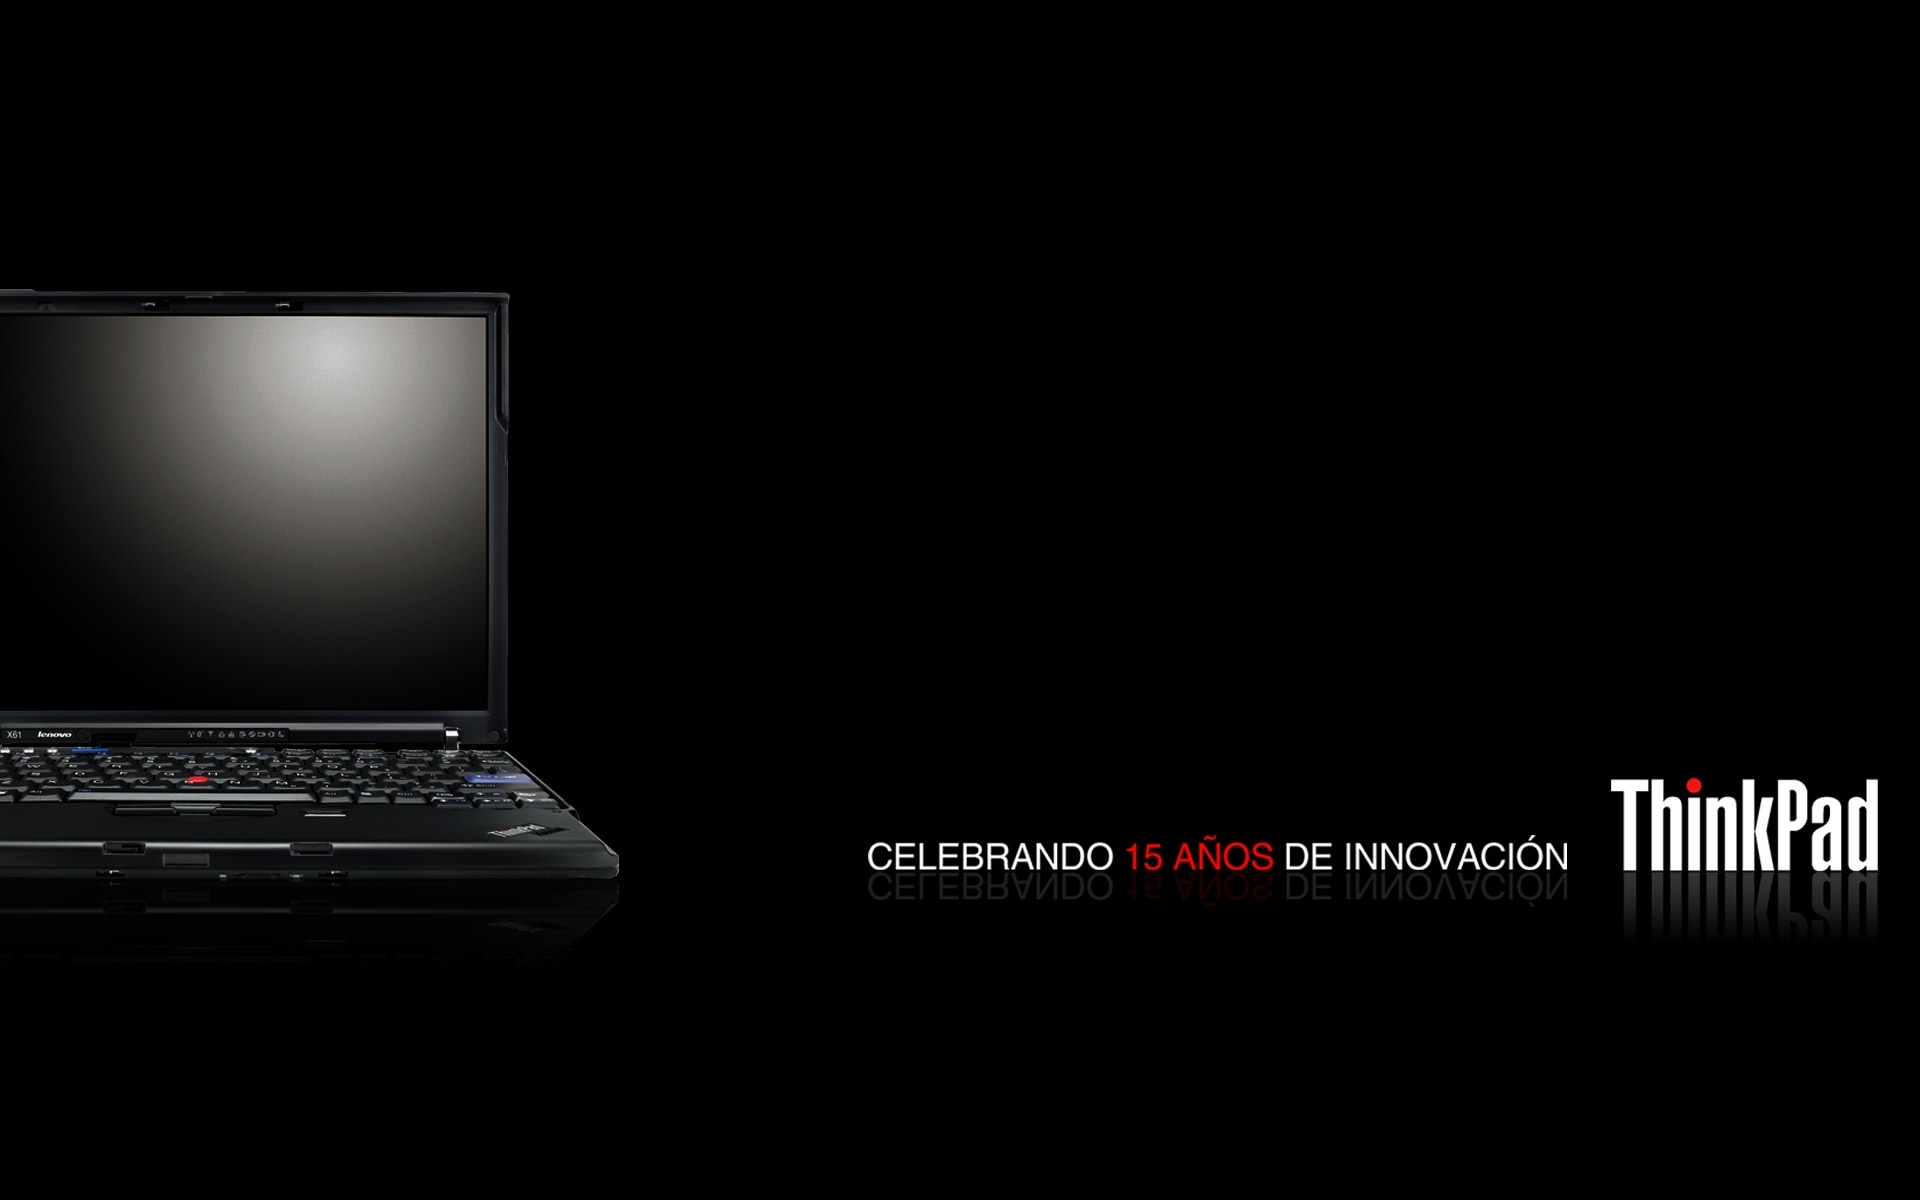 Free Download Lenovo Thinkpad Backgrounds 